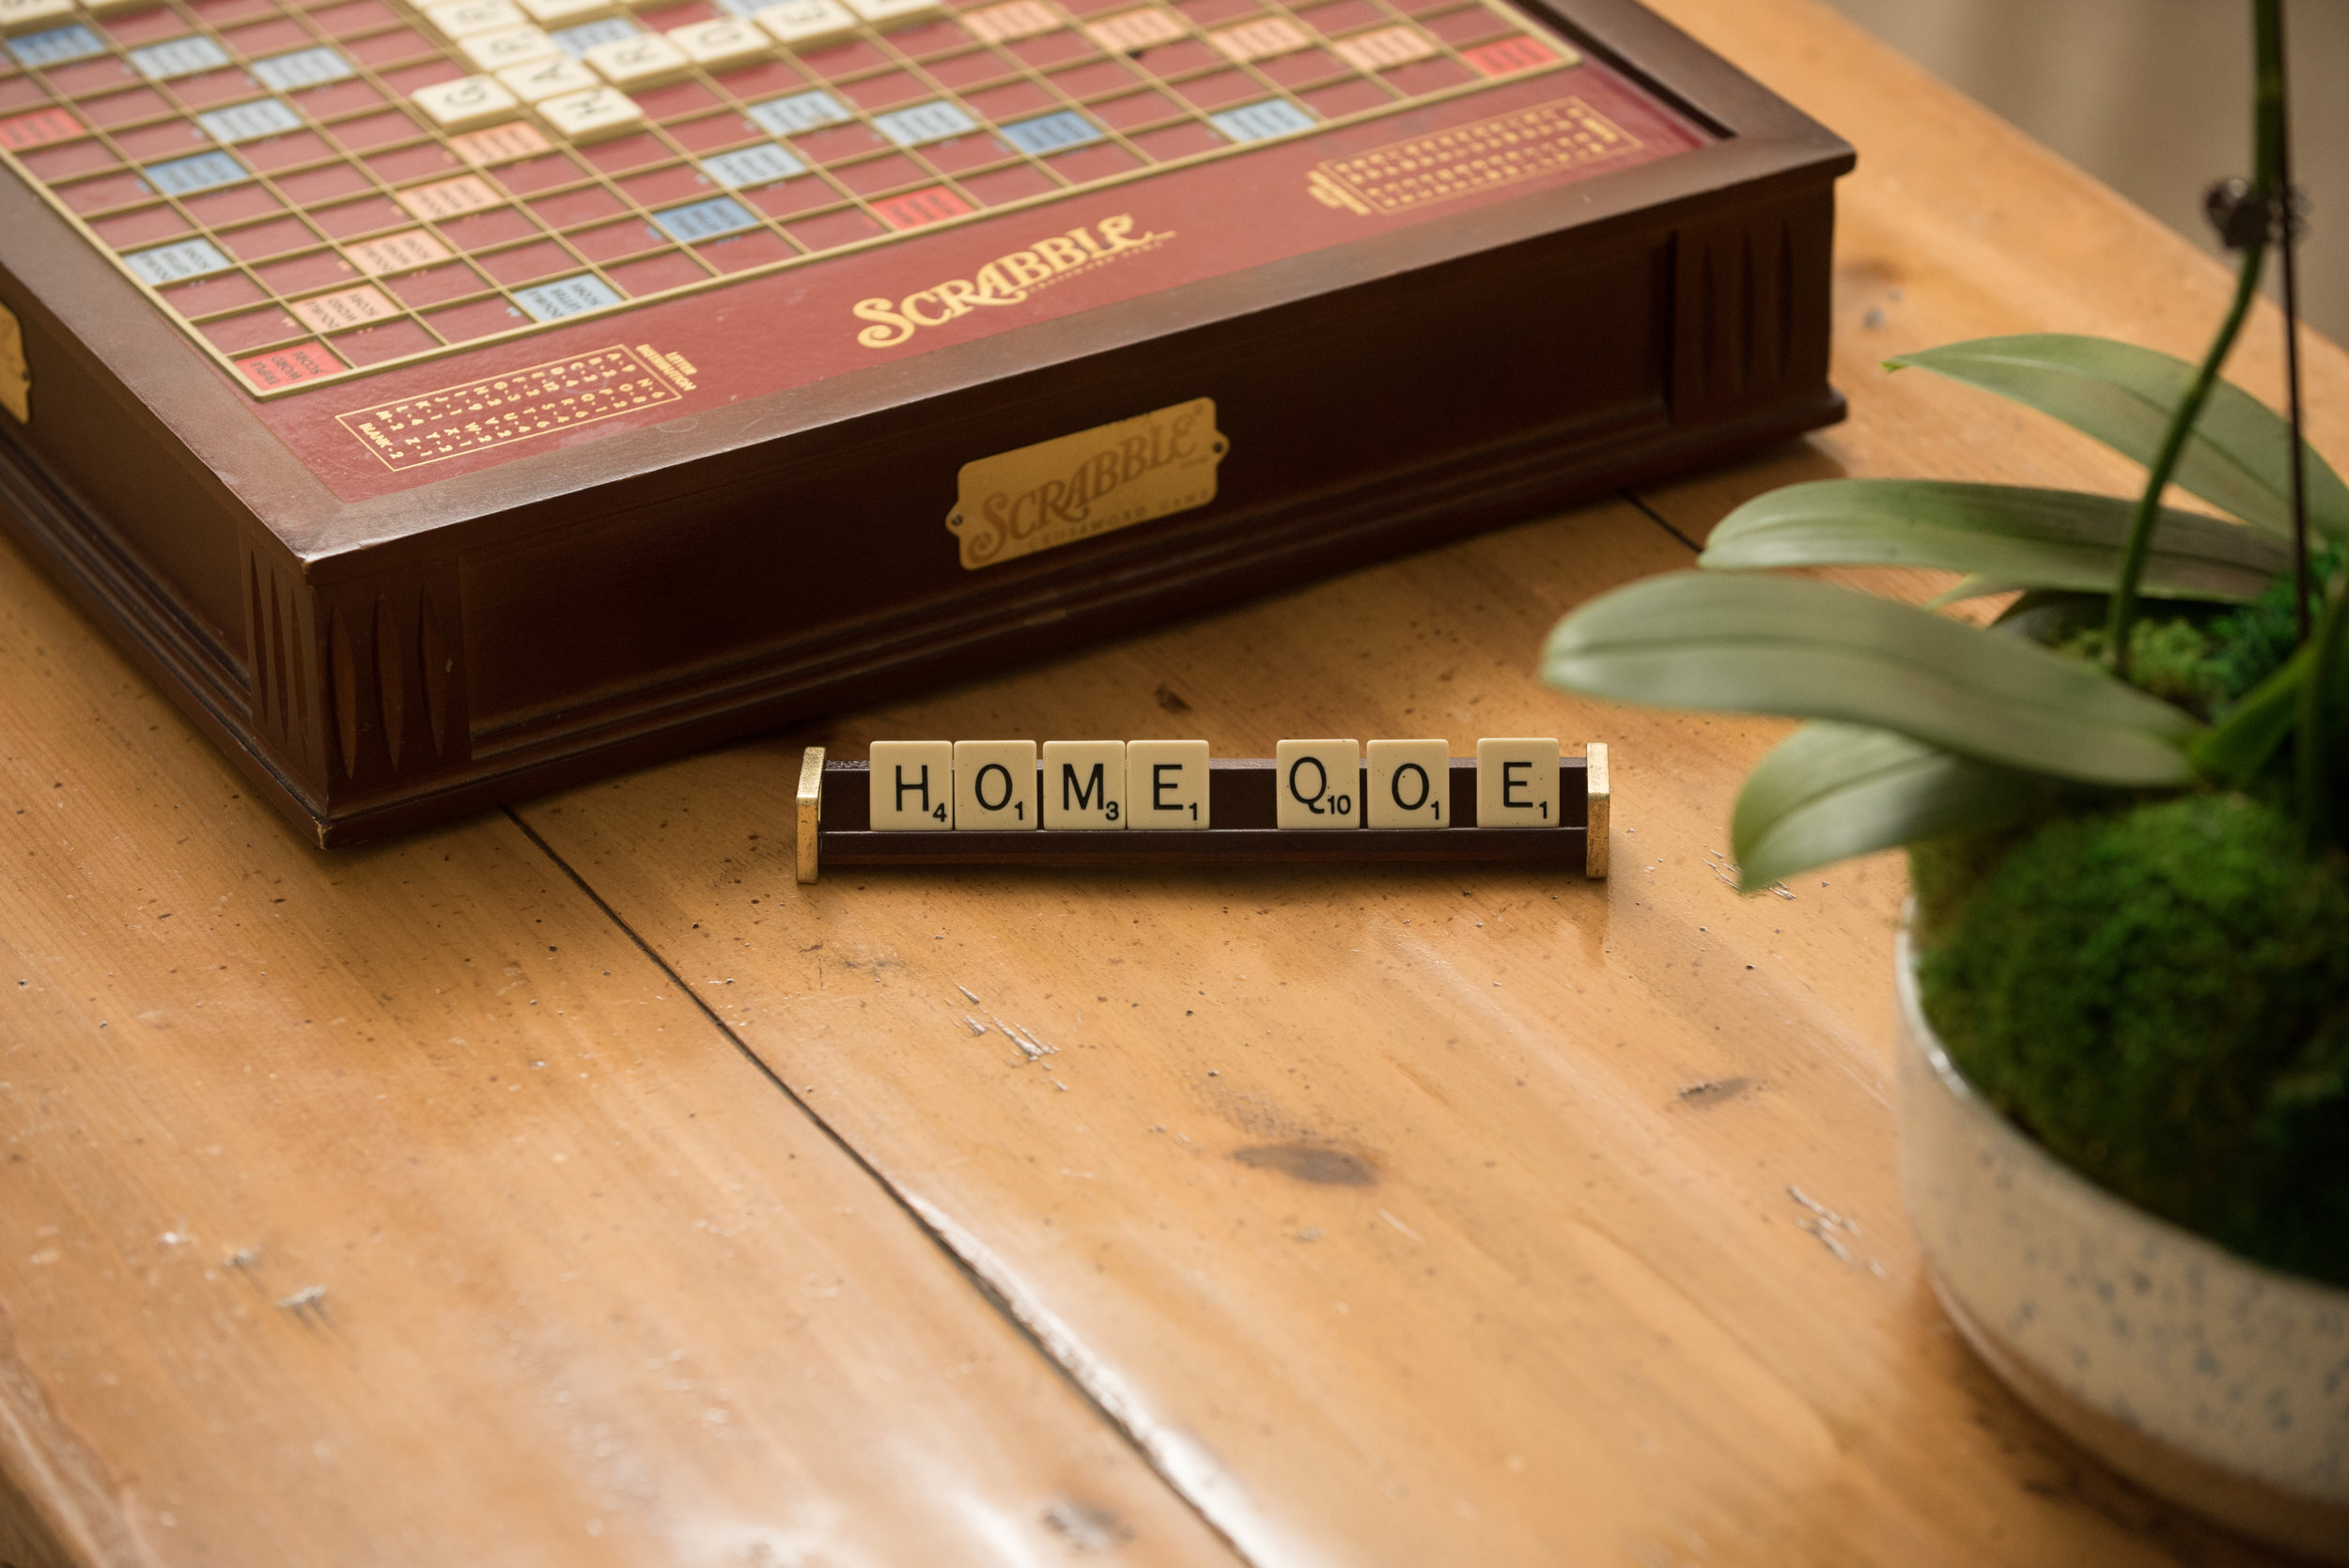 Scrabble game, tile holder with tiles spelling "home" on brown table next to green plant.